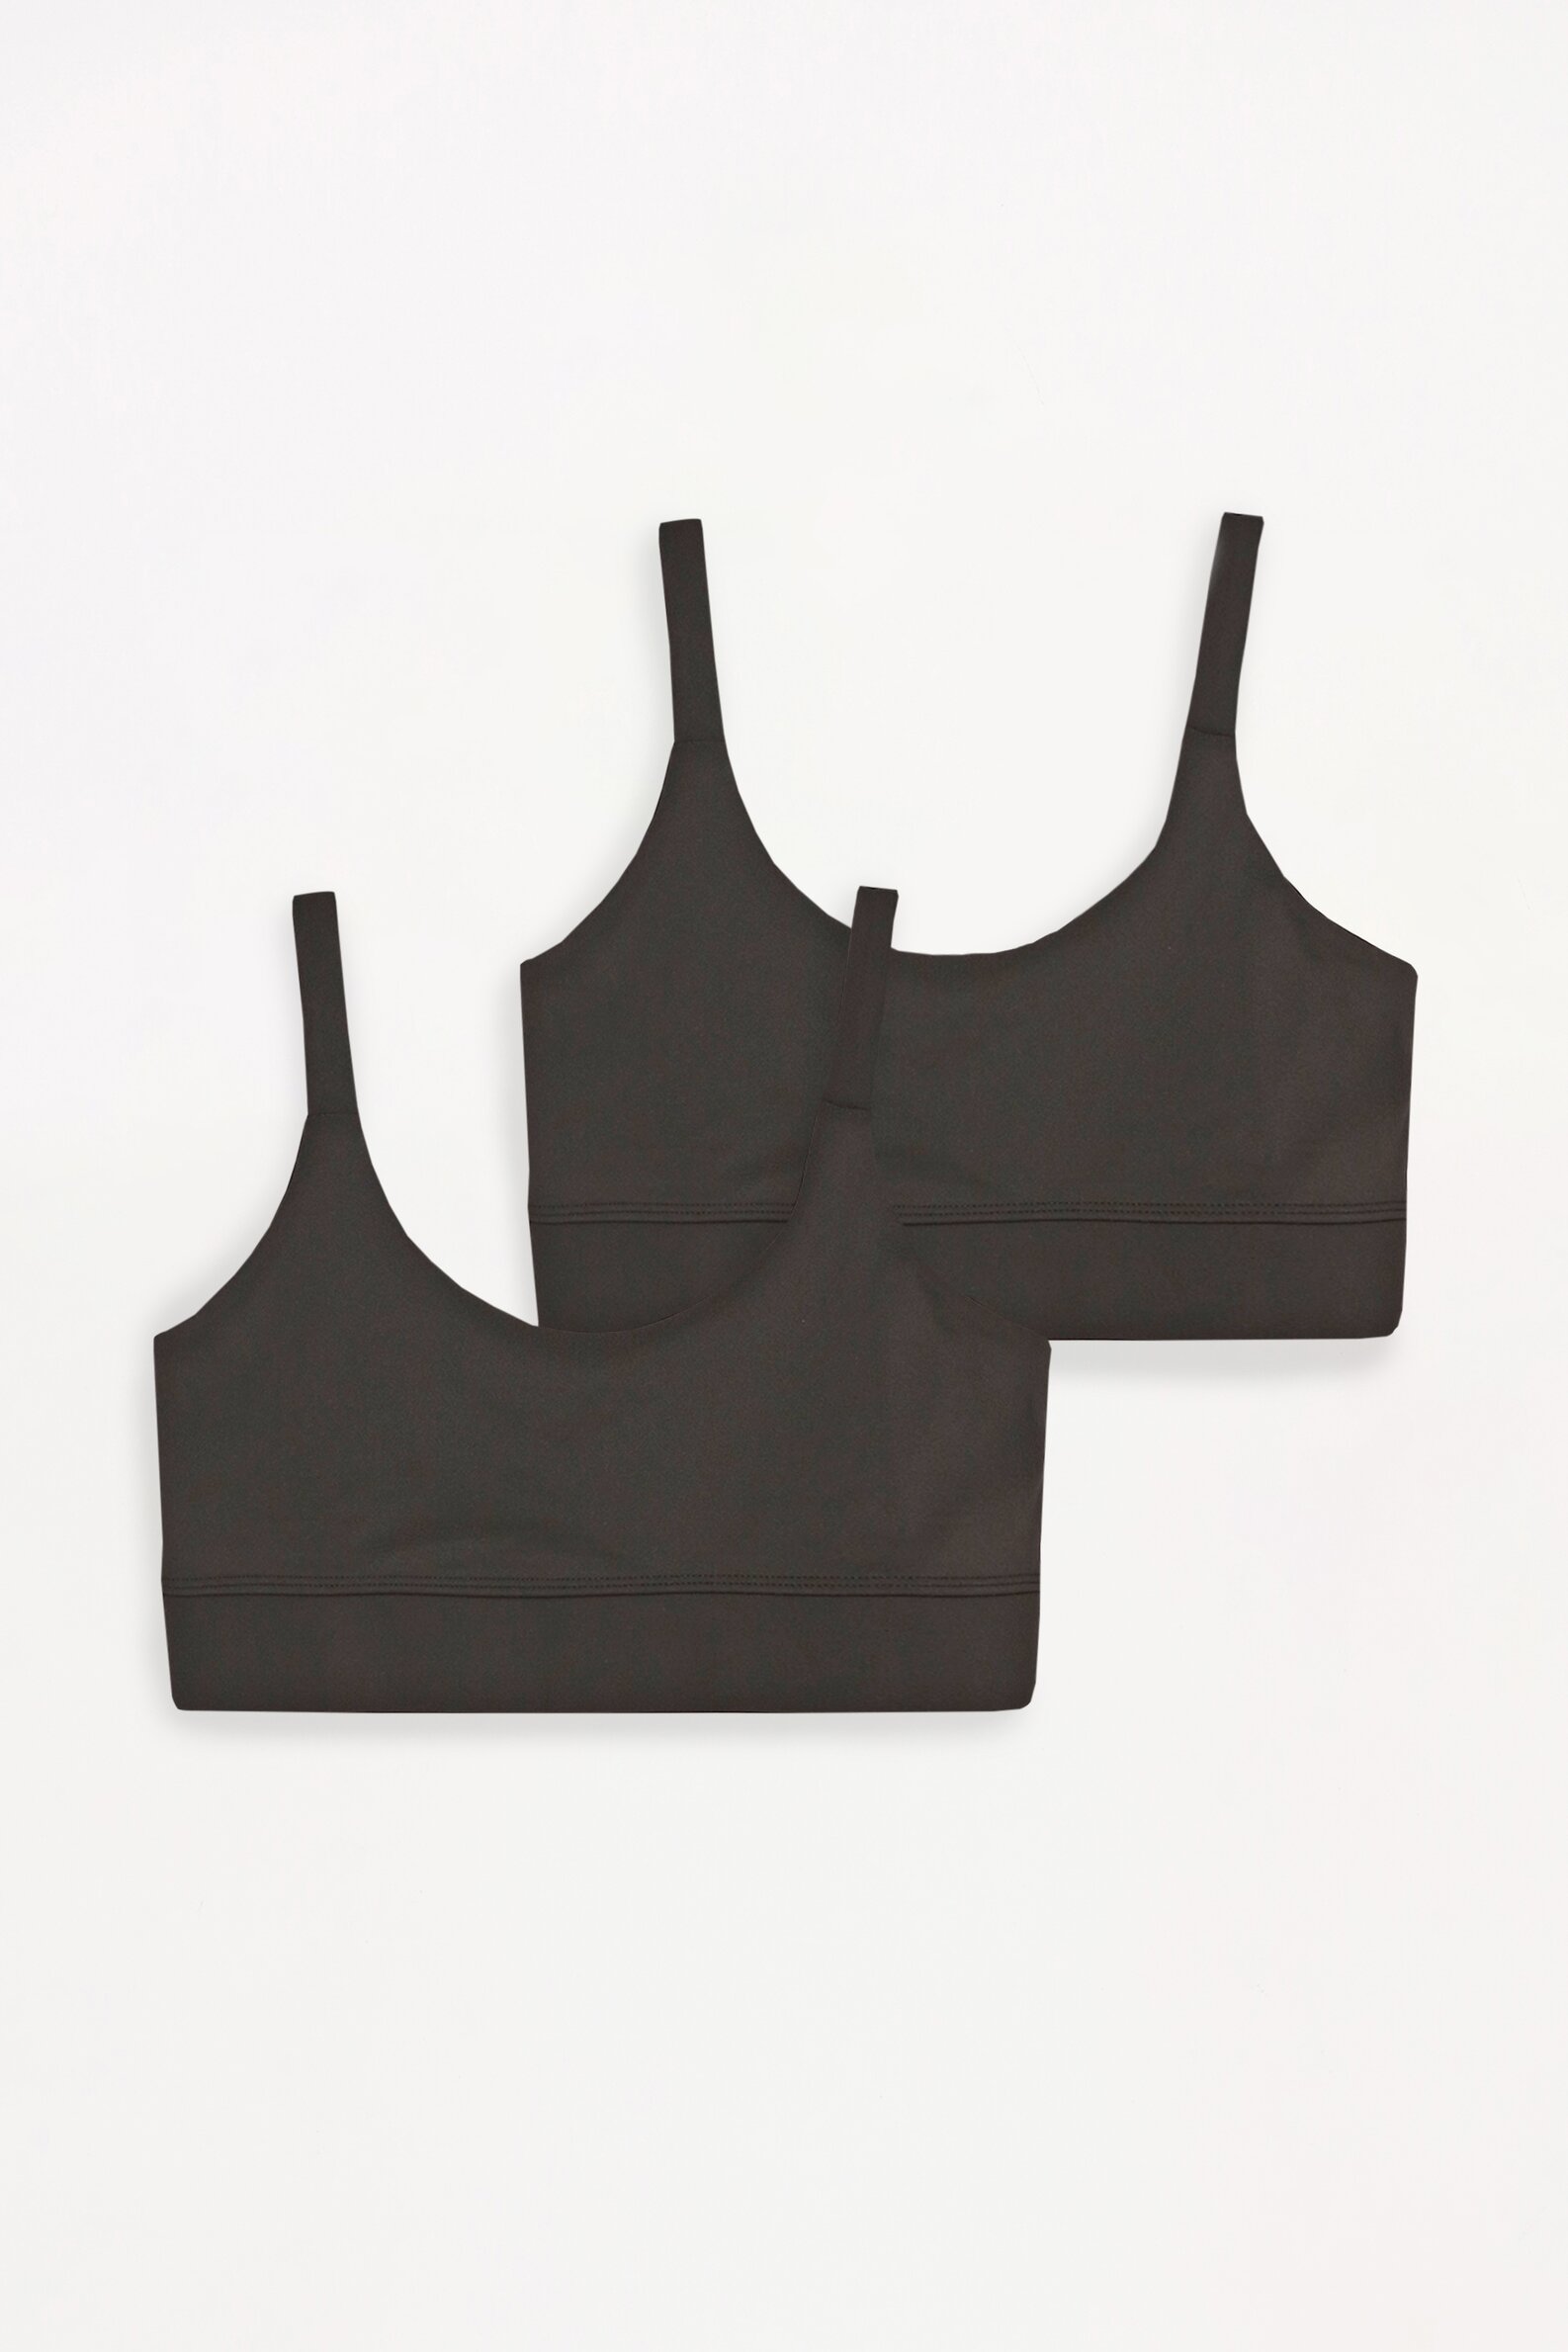 Pack of 2 sports bras - Wow! Prices - Woman 